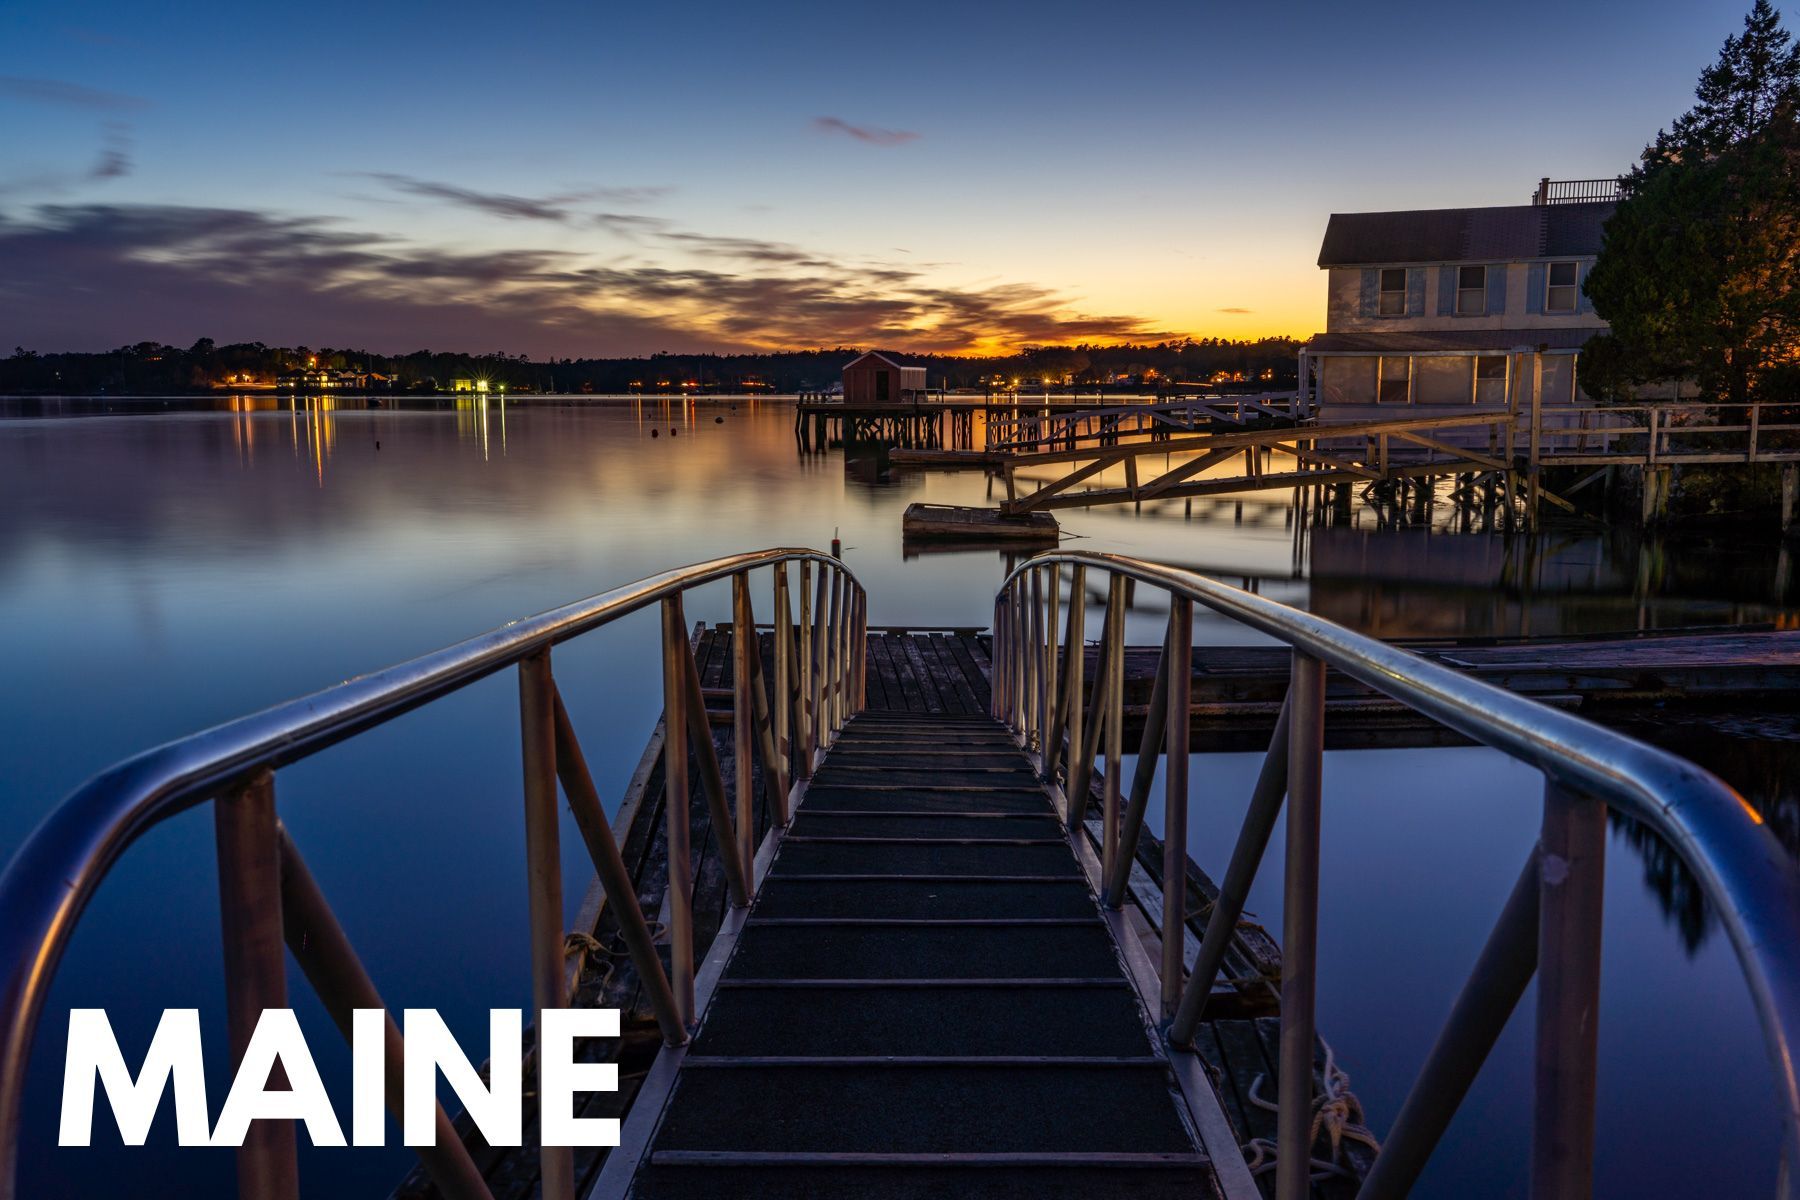 Pier leading out into a still bay at sunset with a colorful sky above and the word Maine overlaid